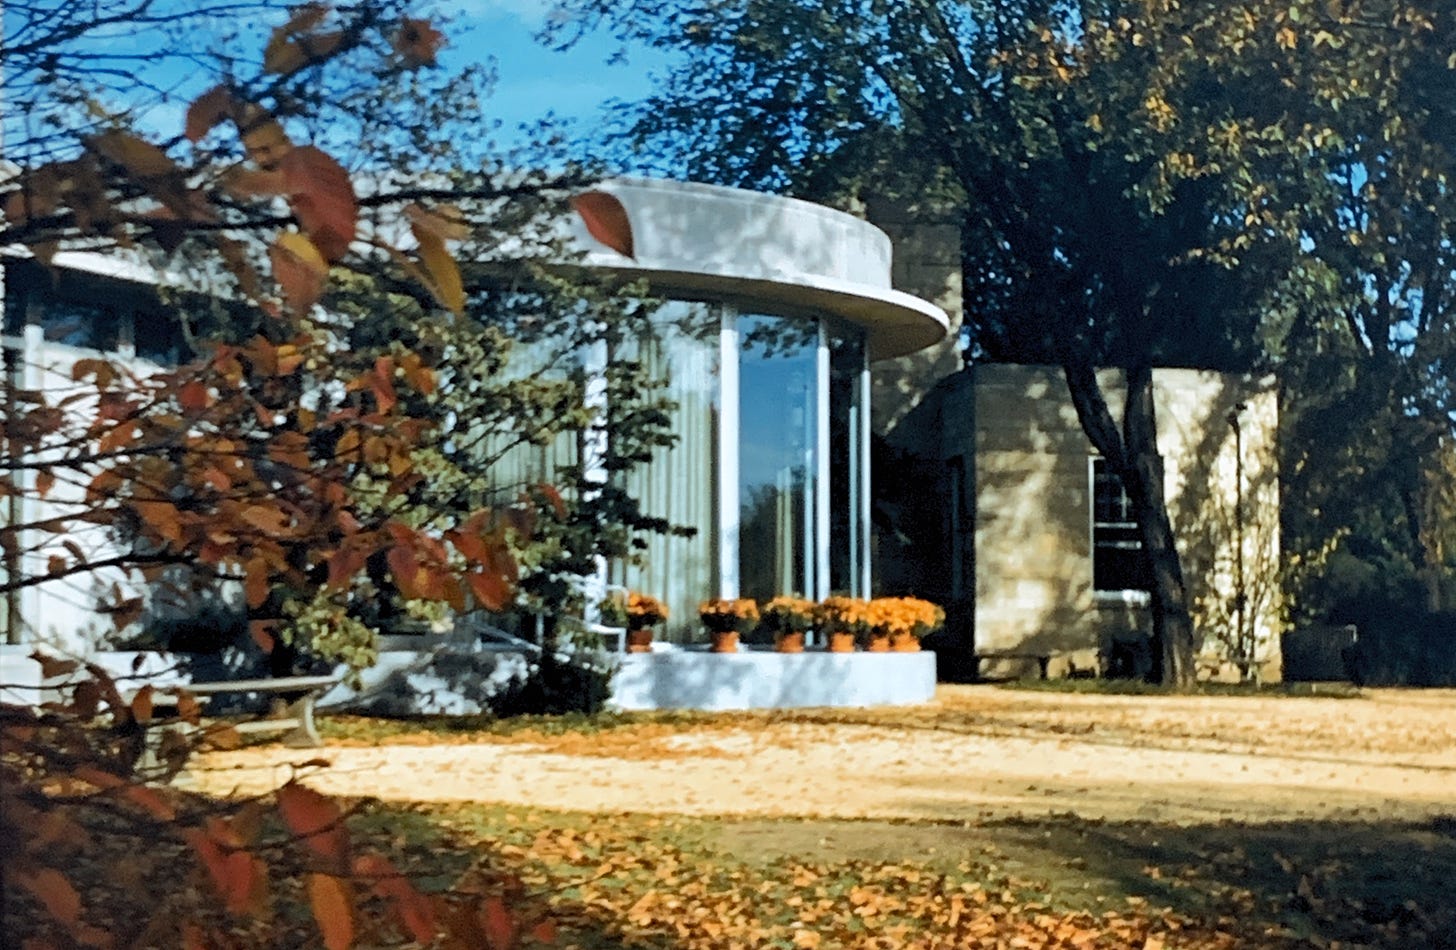 Another angle showing the circular windowed pavilion, from slightly behind the fall leaves of a tree.